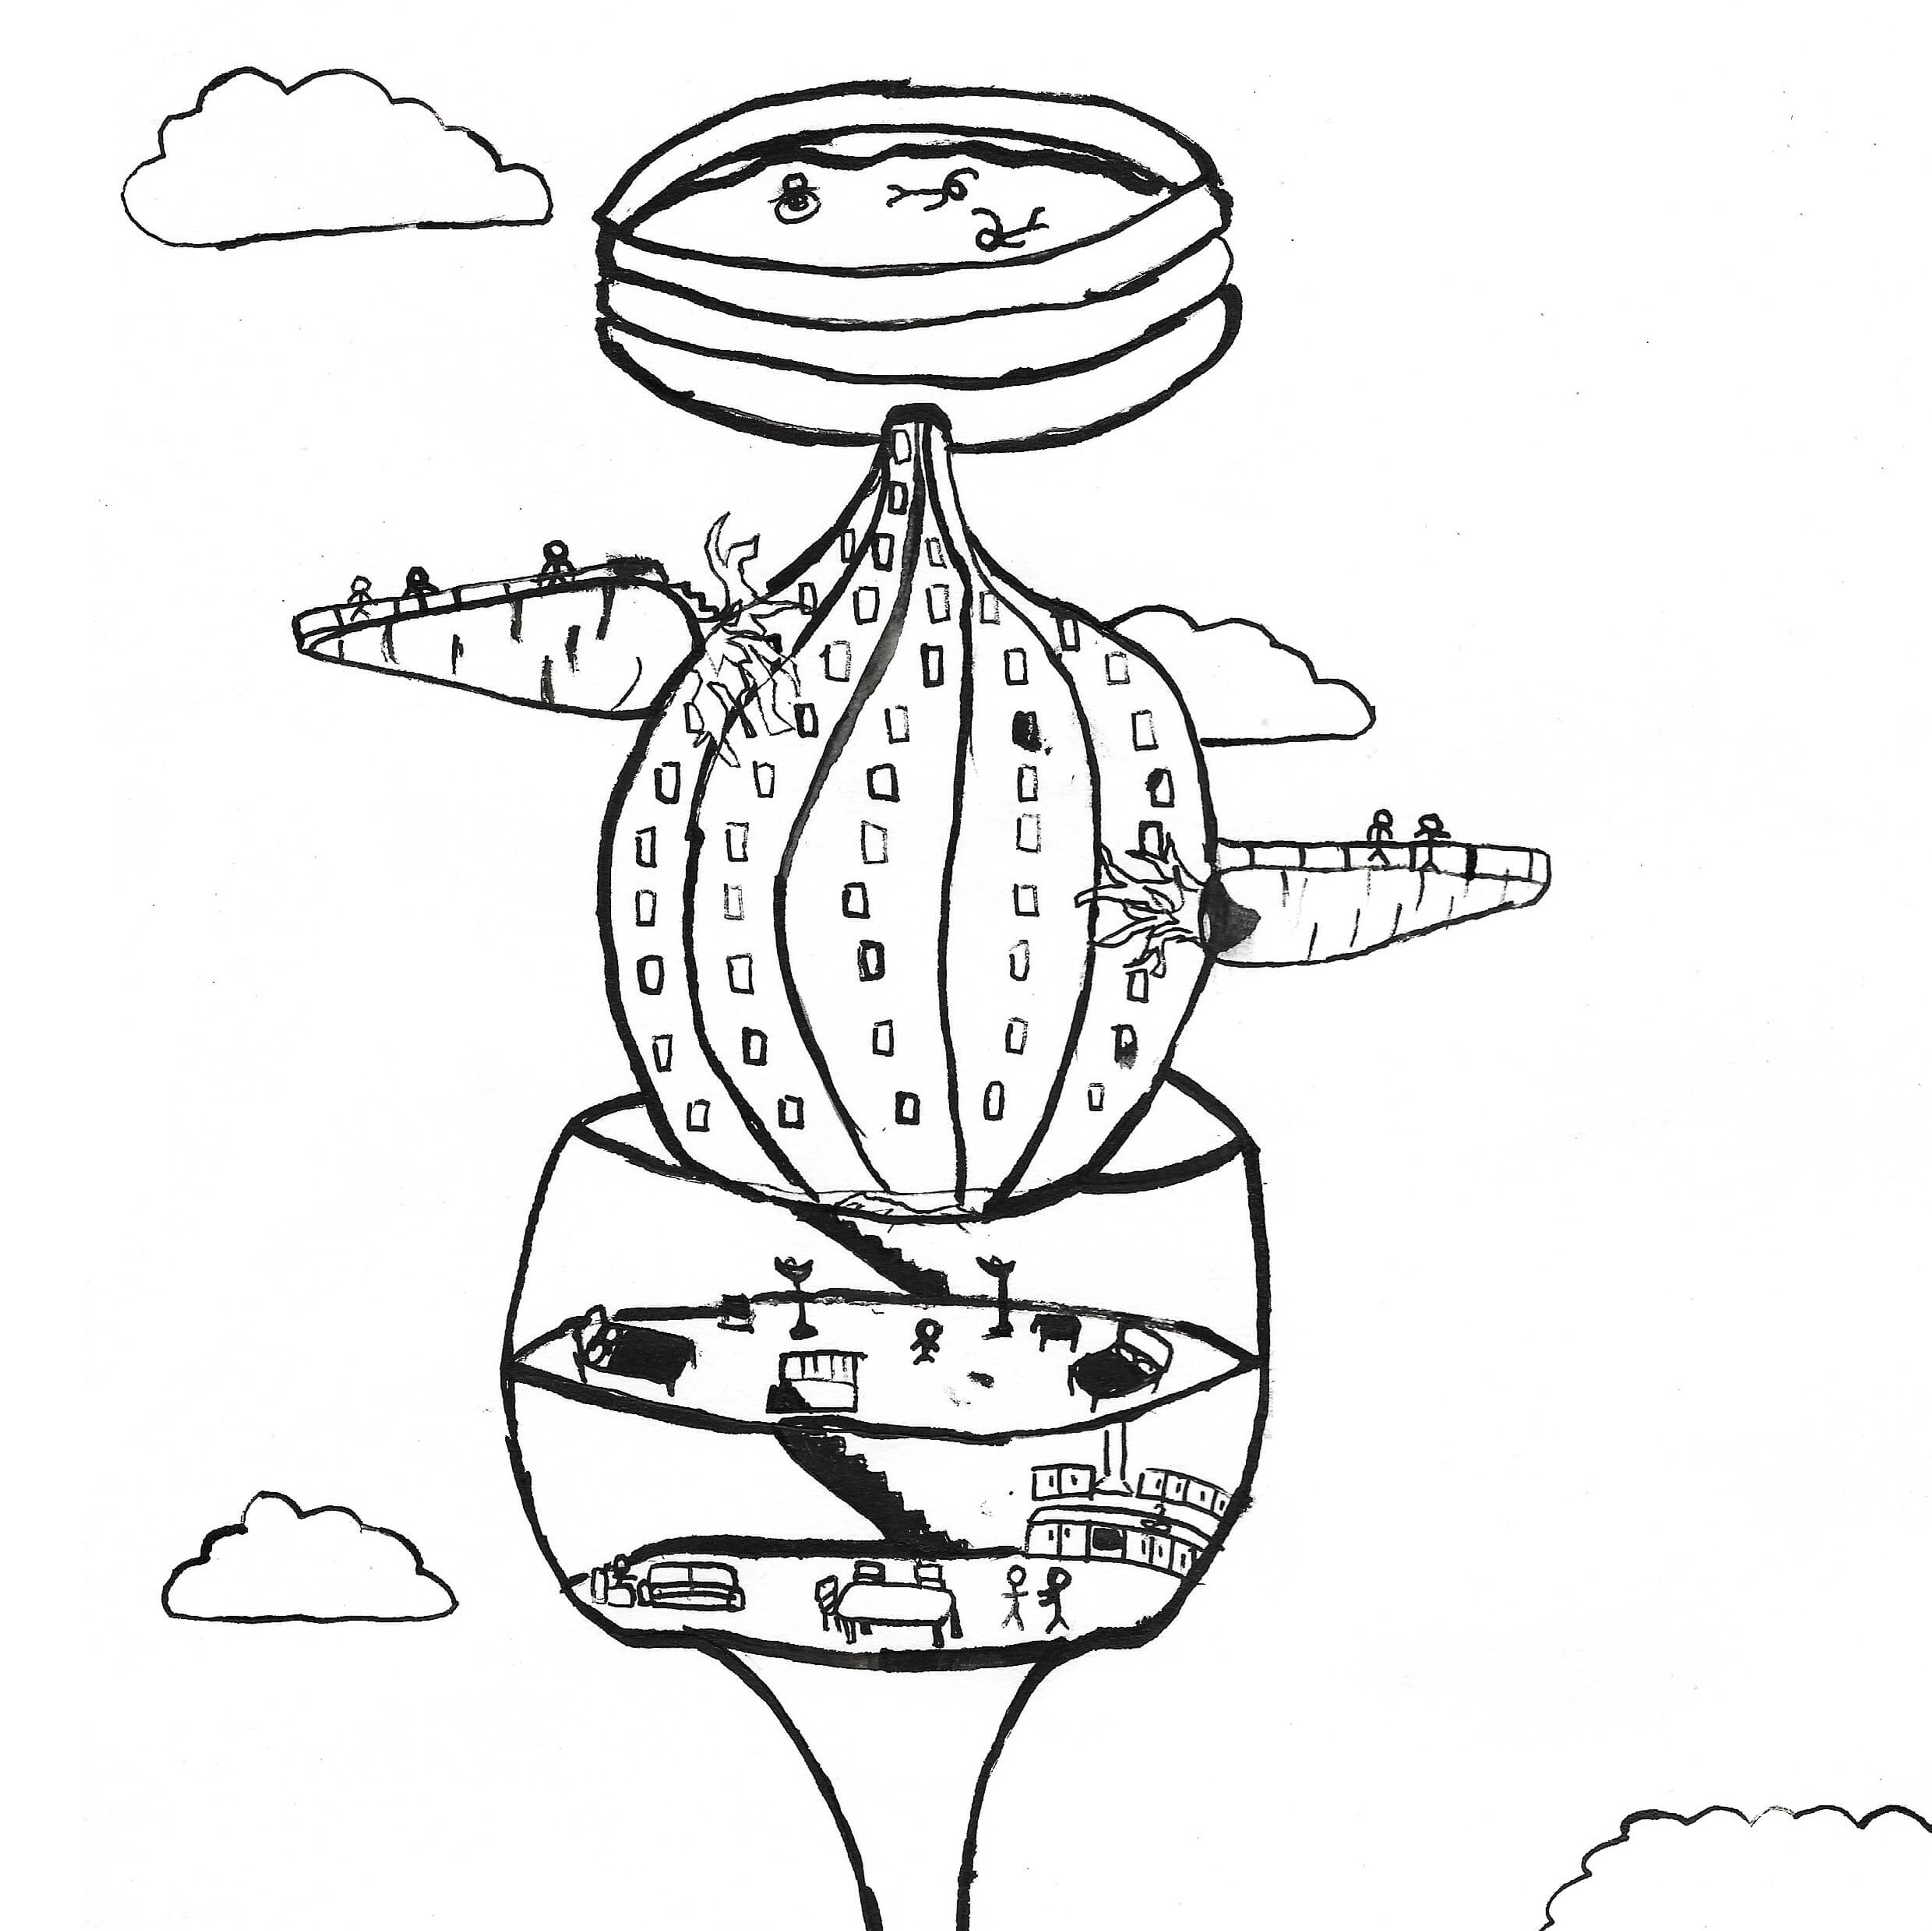 A futuristic glass house in the sky with an onion-shaped dome and see-through floors